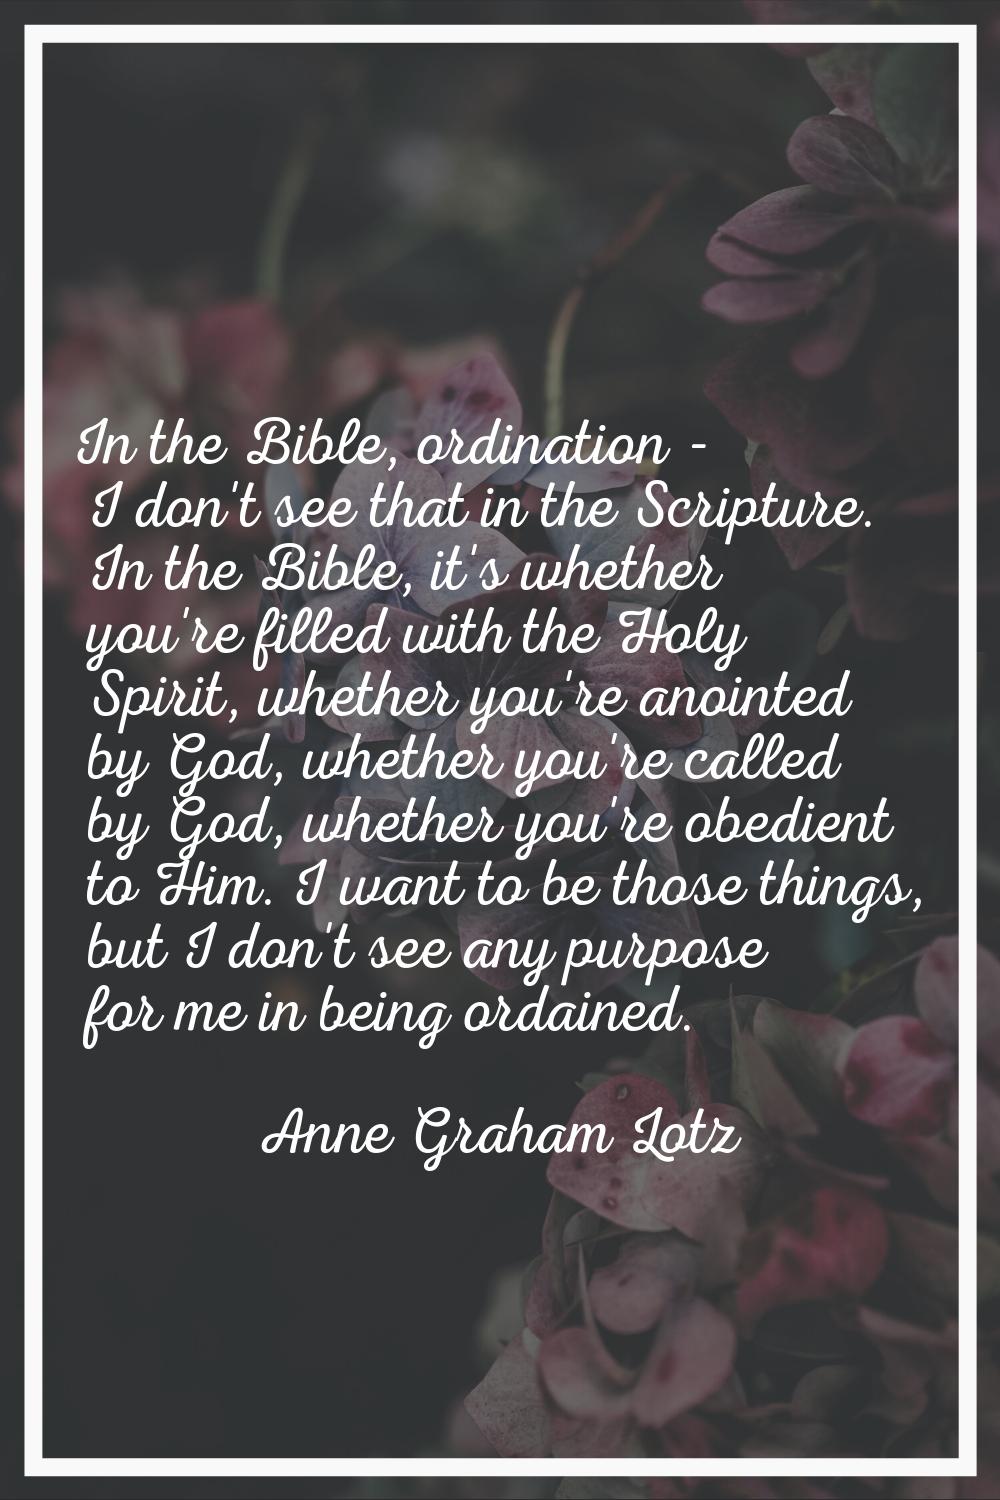 In the Bible, ordination - I don't see that in the Scripture. In the Bible, it's whether you're fil